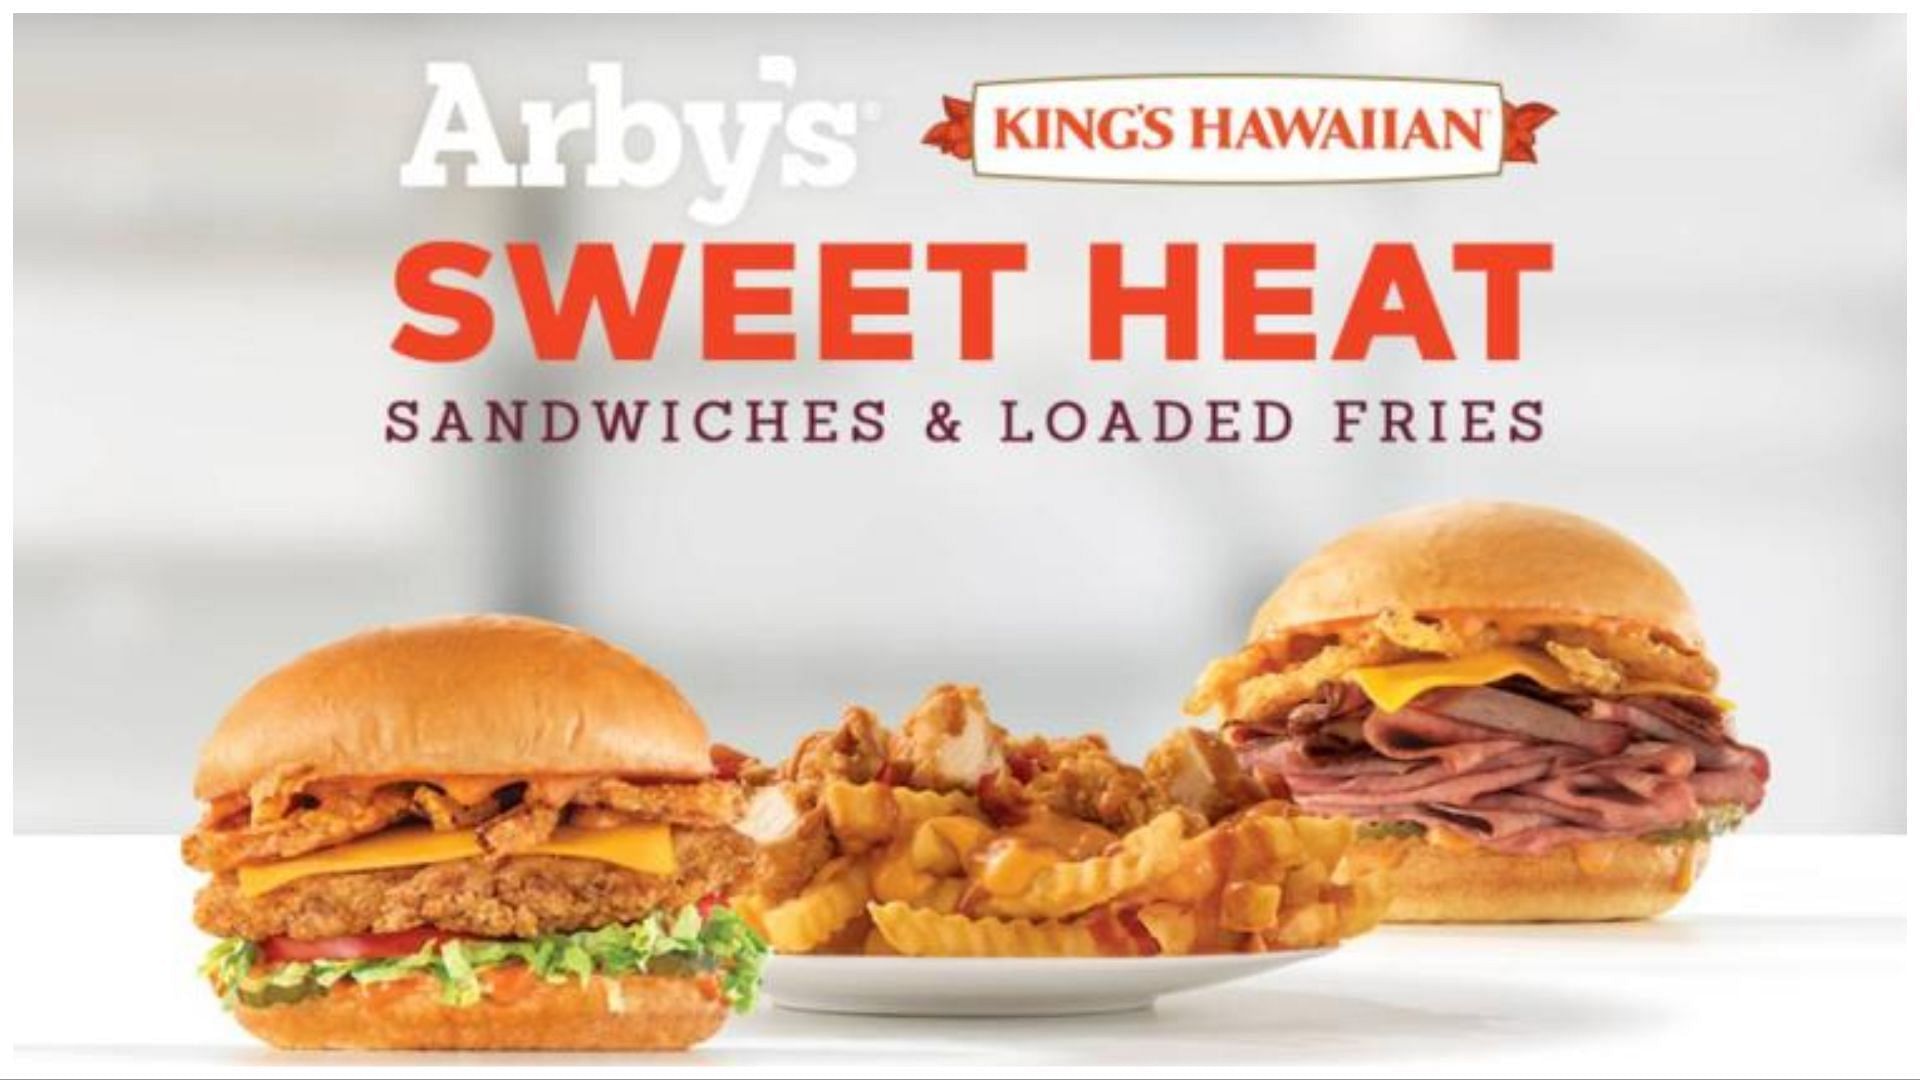 Arby&rsquo;s King&rsquo;s Hawaiian Sweet Heat Chicken Sandwich! (Image via Arby